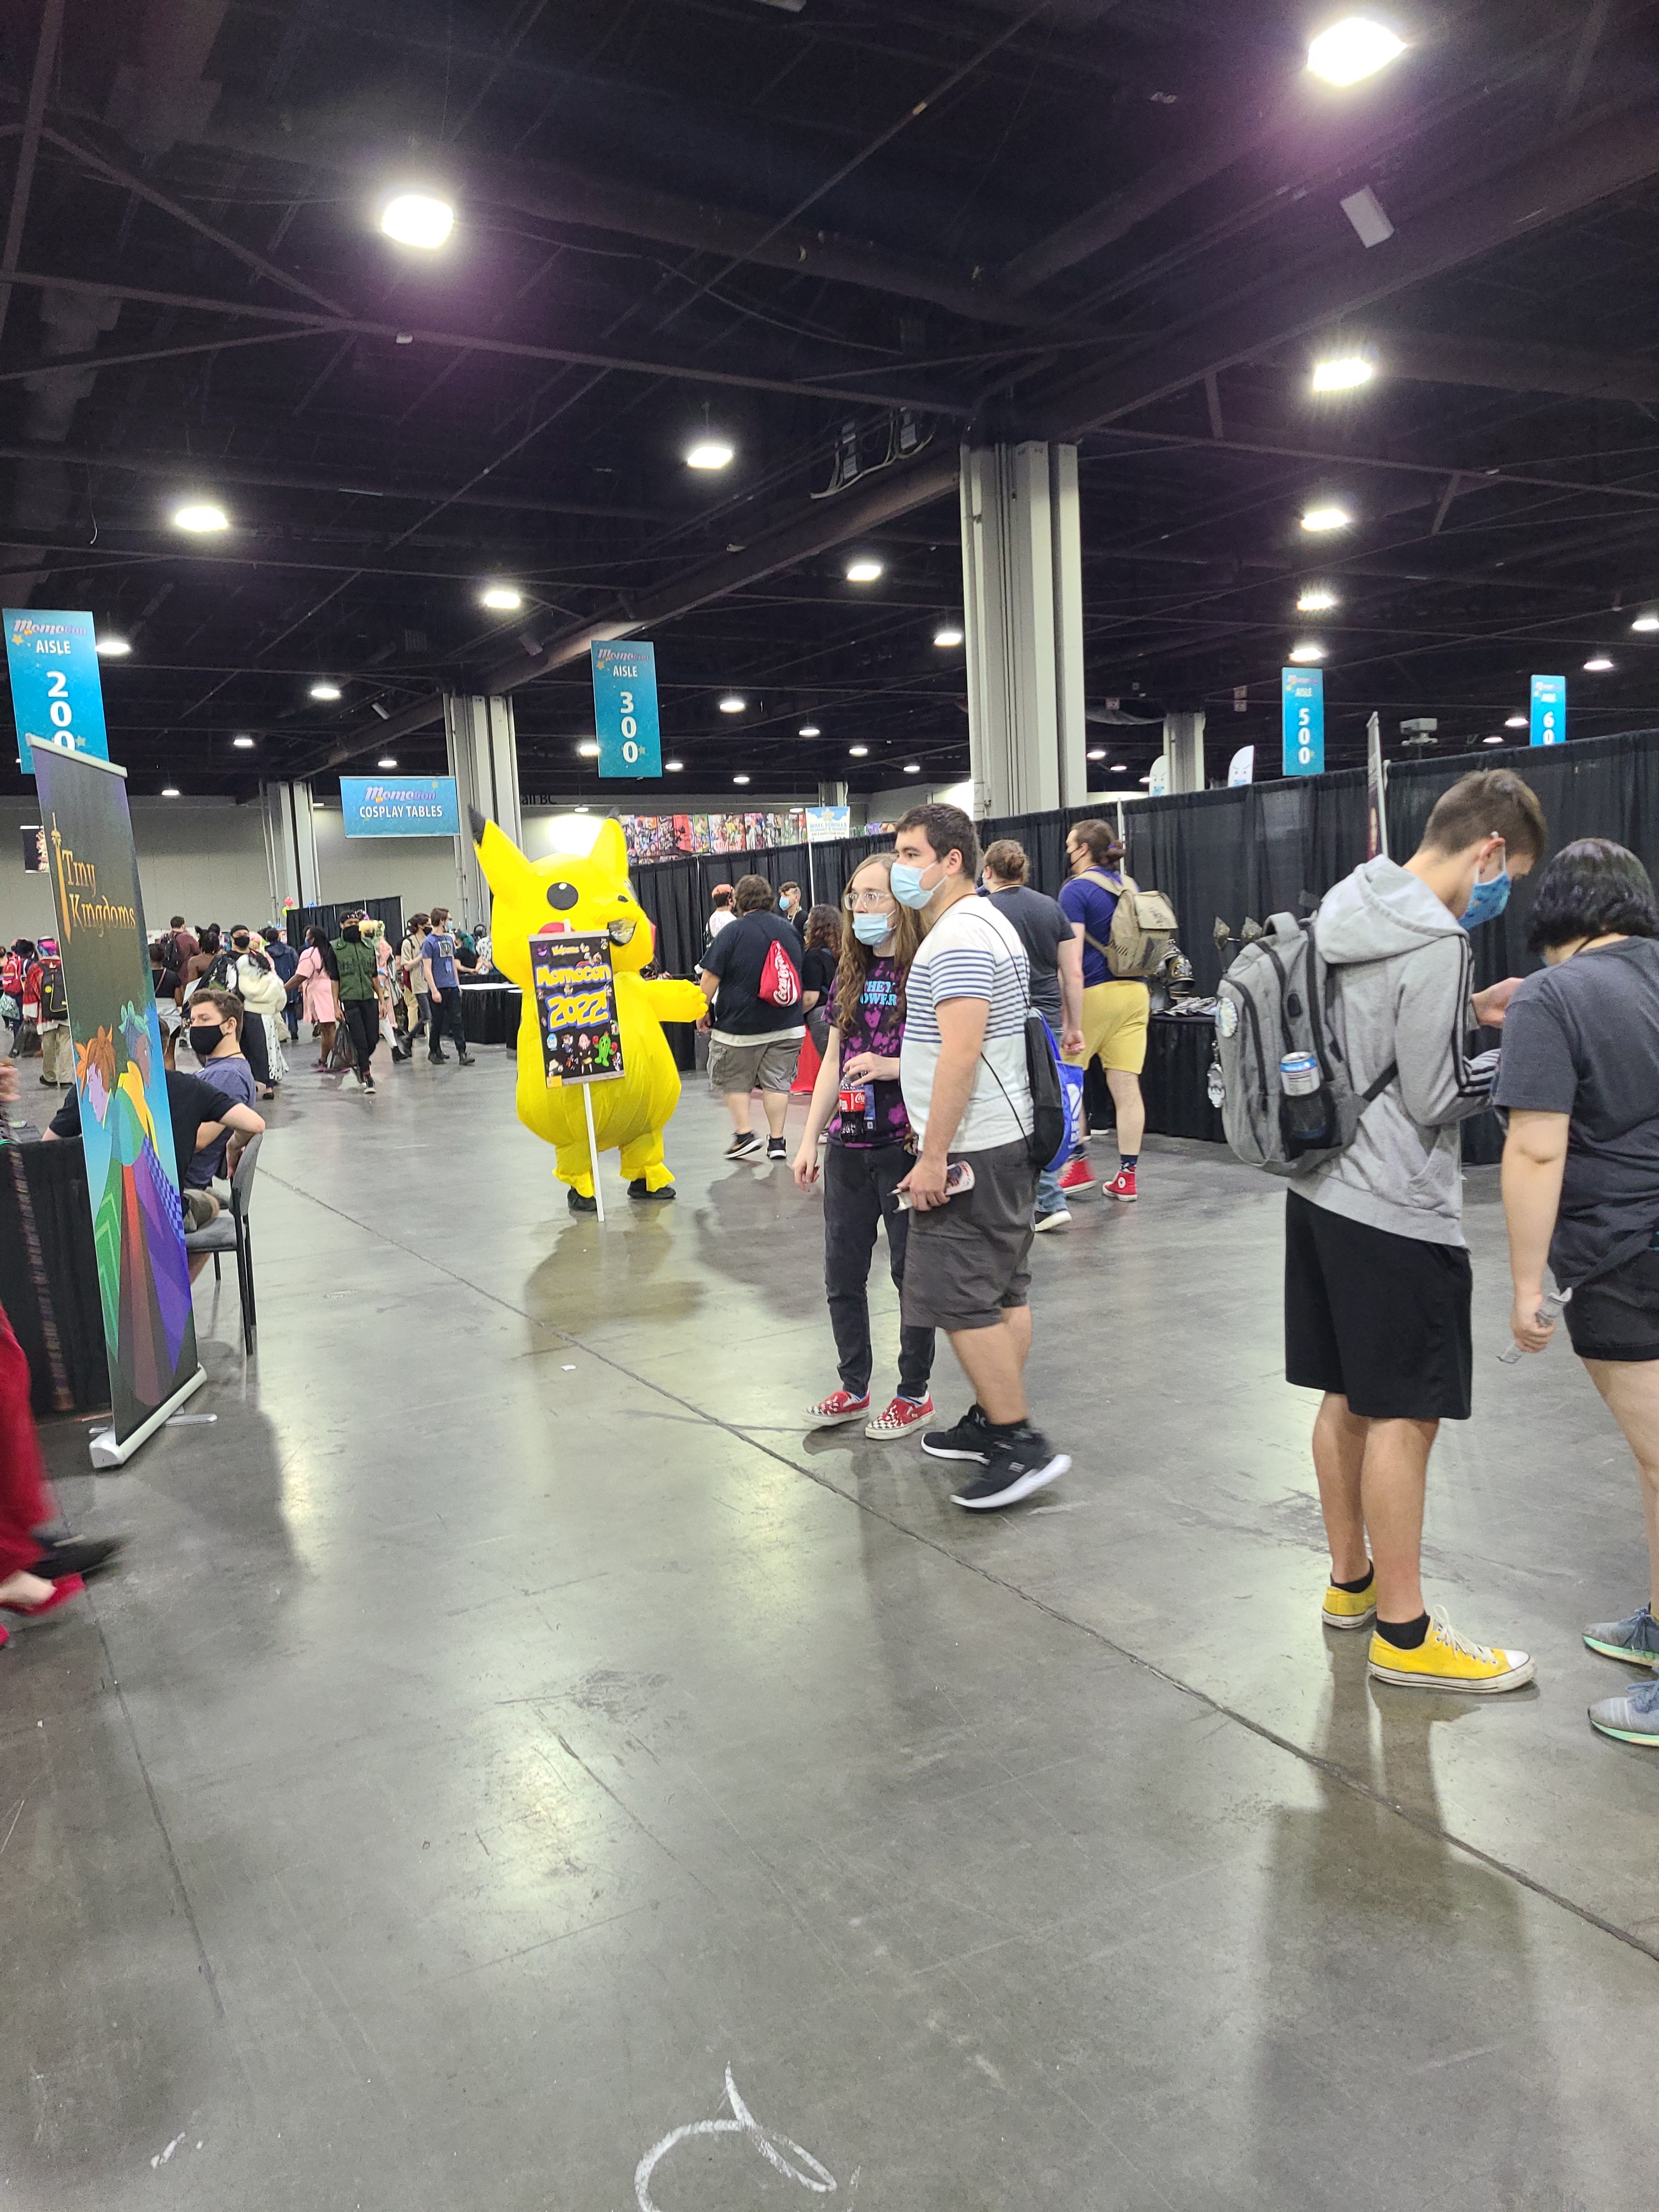 Pikachu inflatable costumed person holding a MomoCon2022 sign